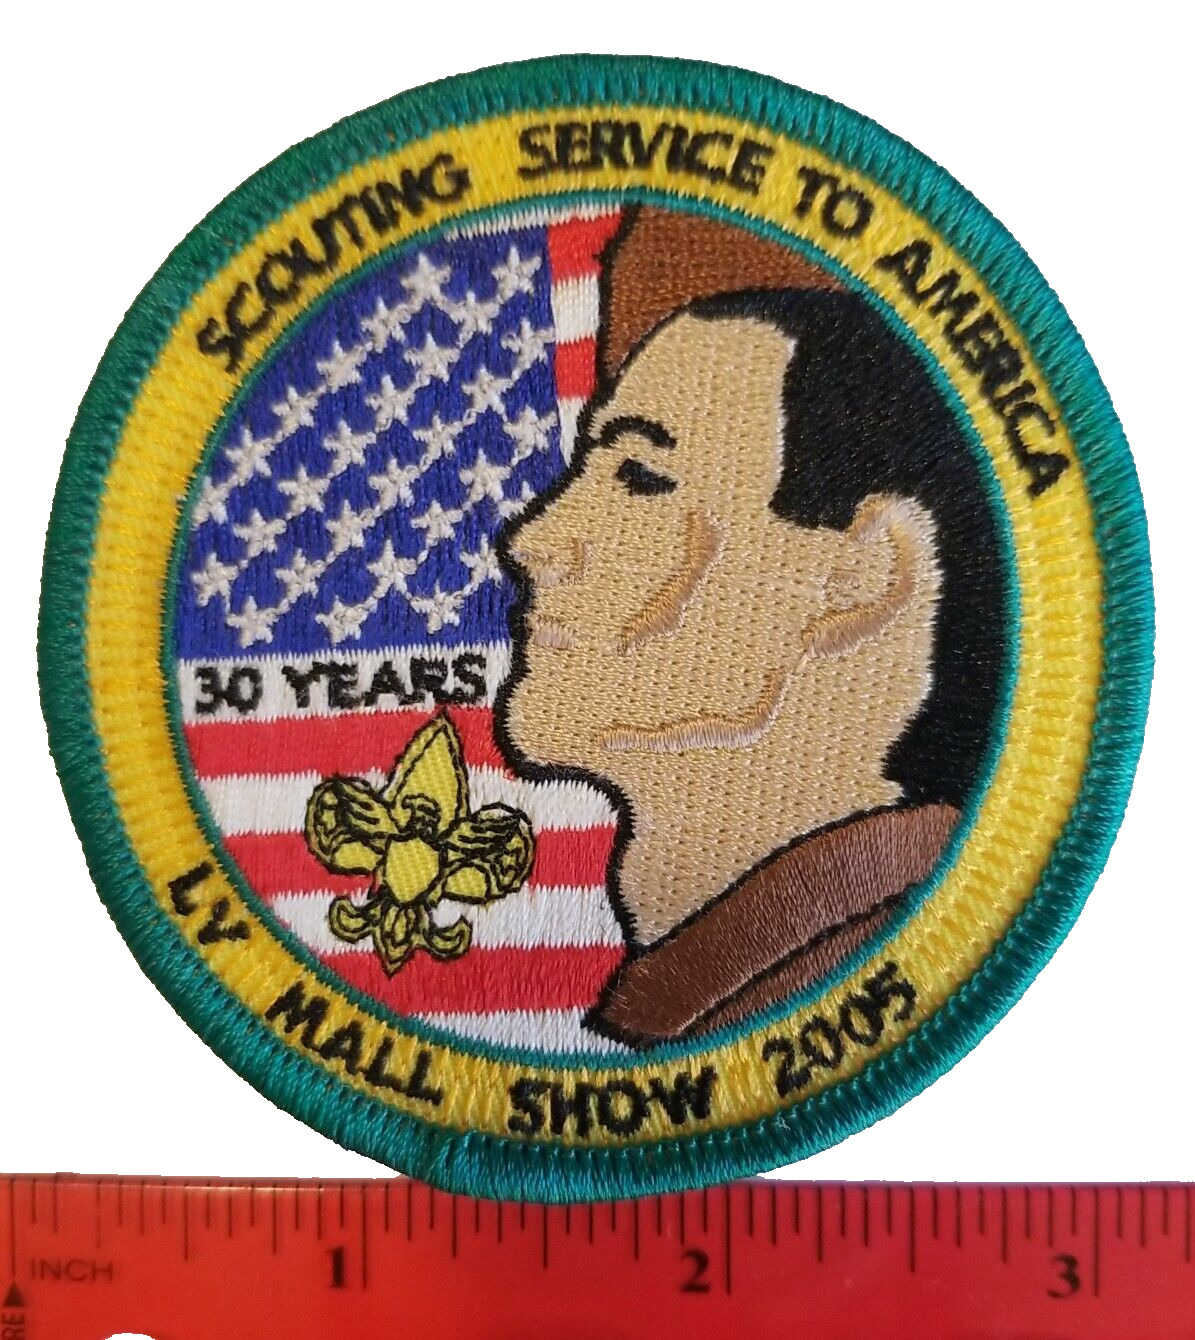 2005 BSA Patch 30 Years Service To America LV Mall Show Boy Scout Round Vintage